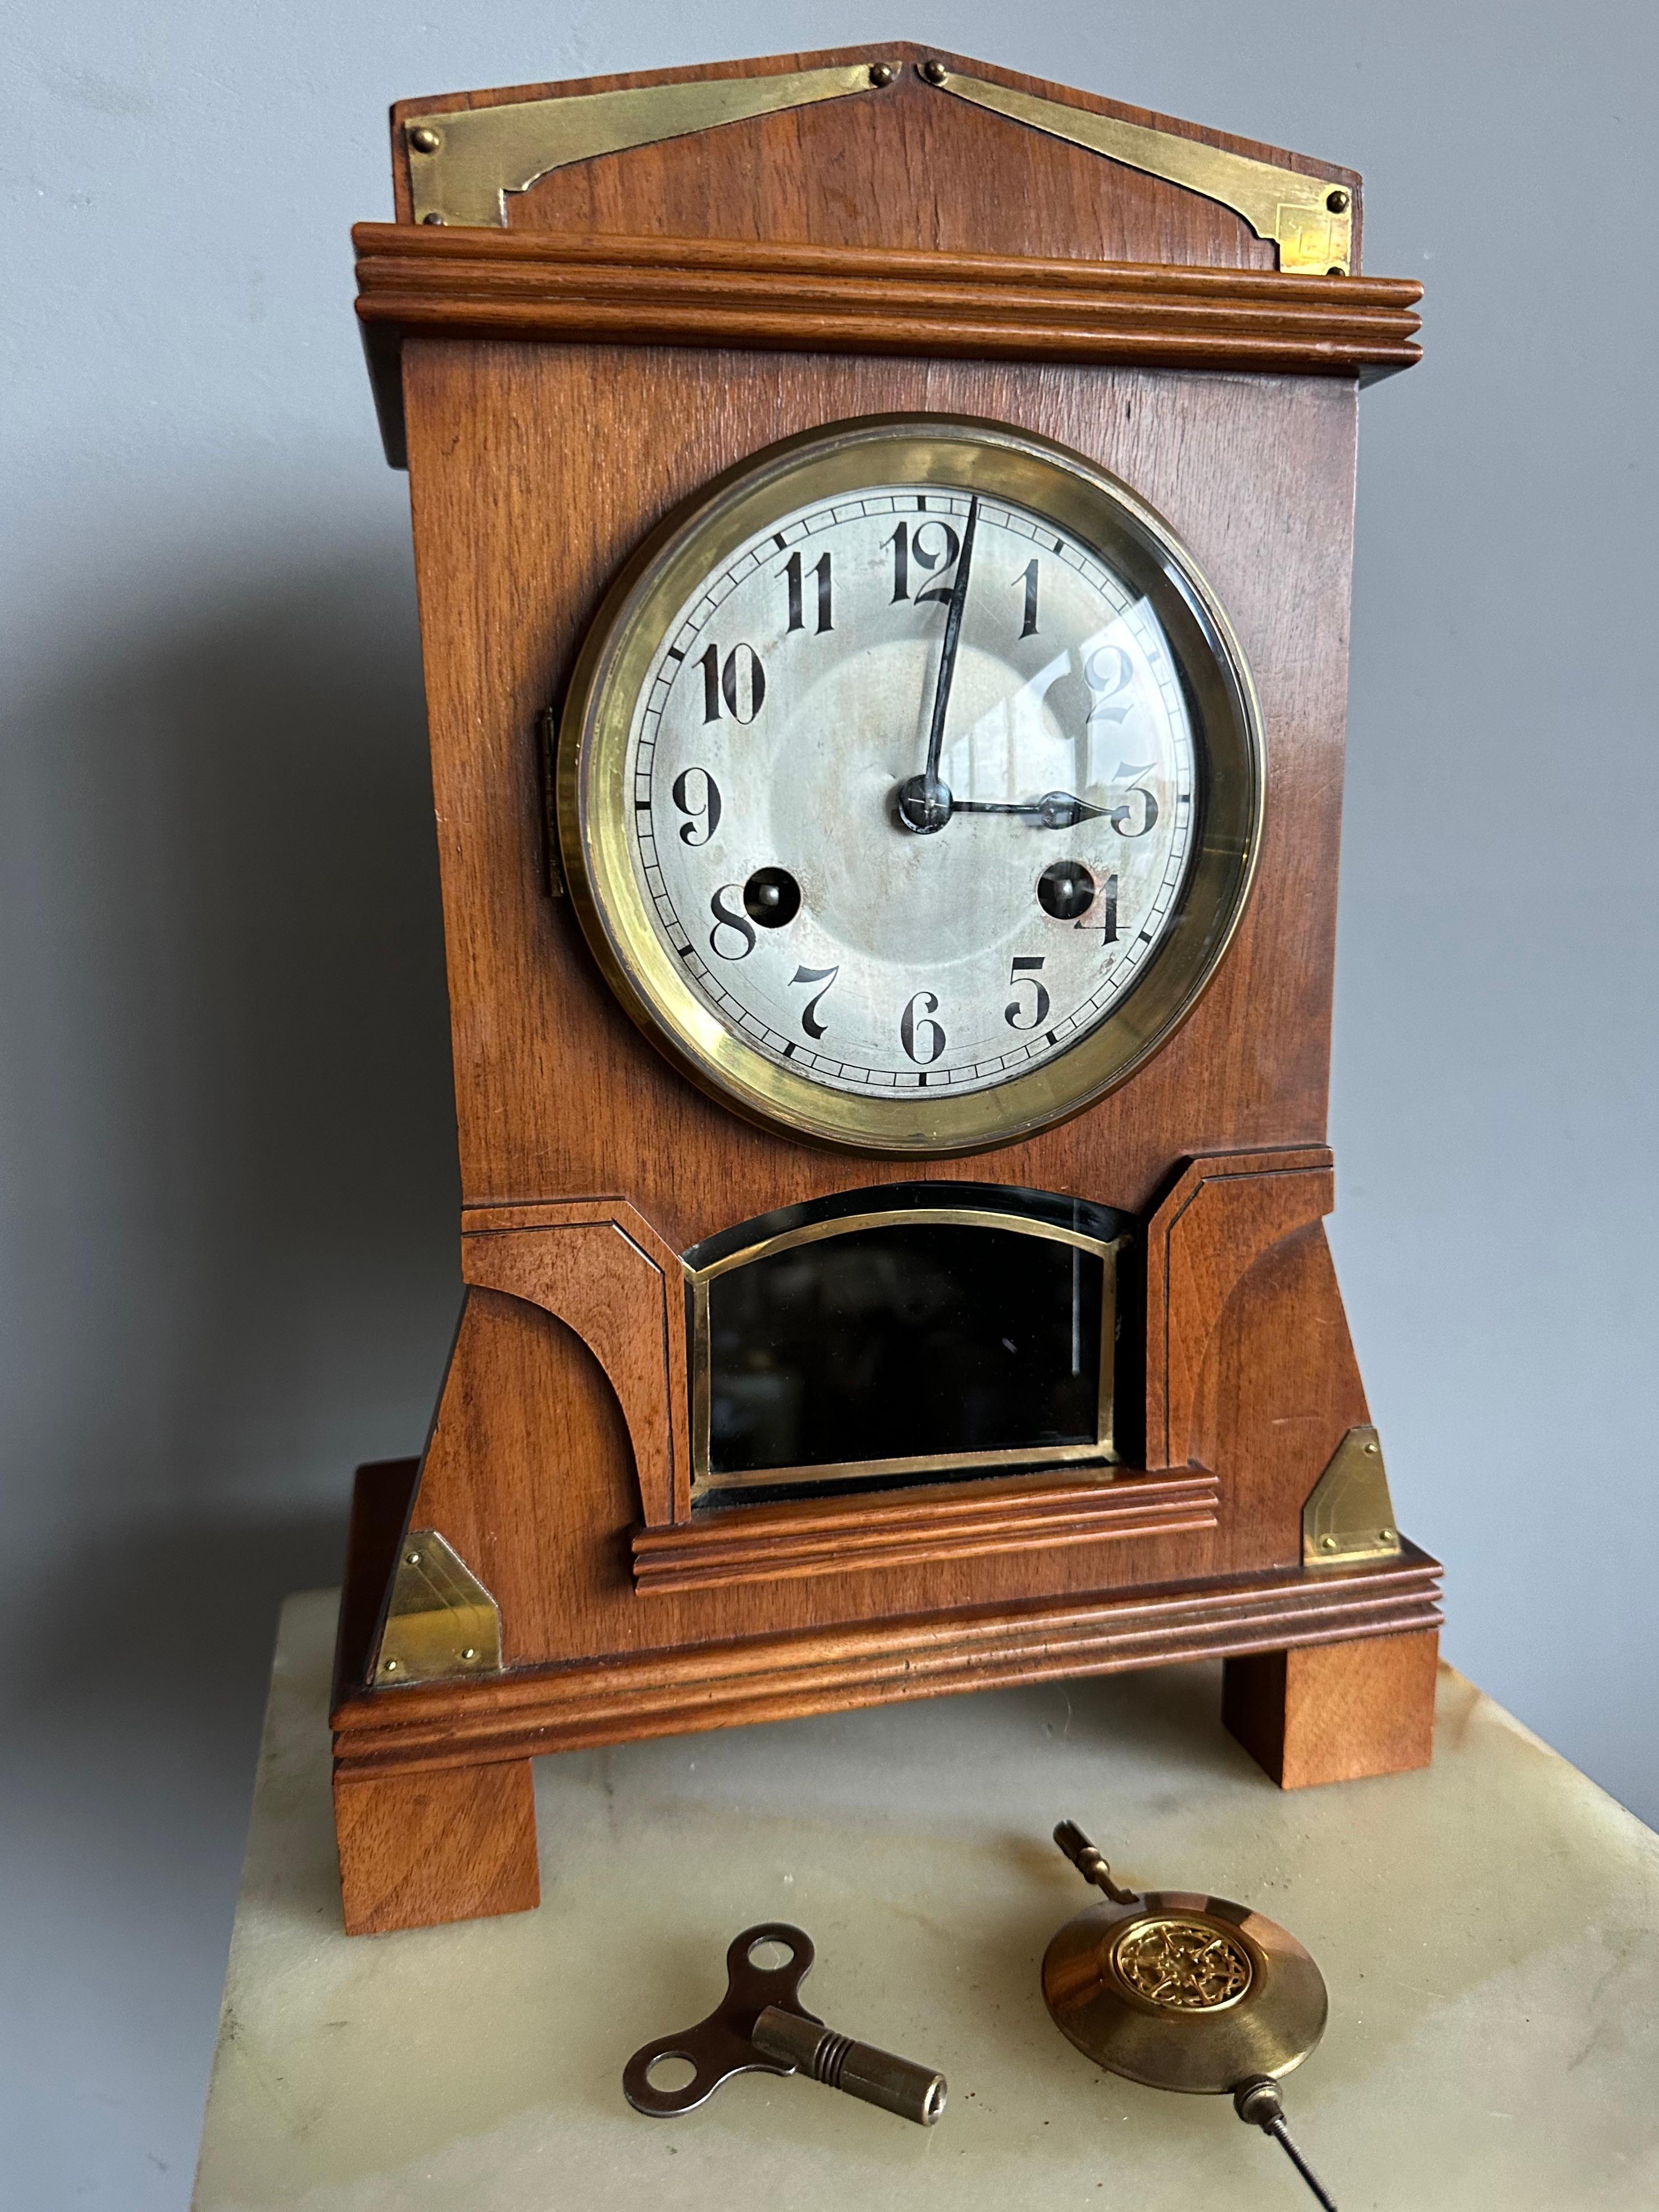 Beautiful and stylish clock, in good working order.

If you are looking for an exceptionally designed clock from the Arts & Crafts era then this rare mantel clock could be yours to enjoy soon. You will rarely find a table clock from the Arts &